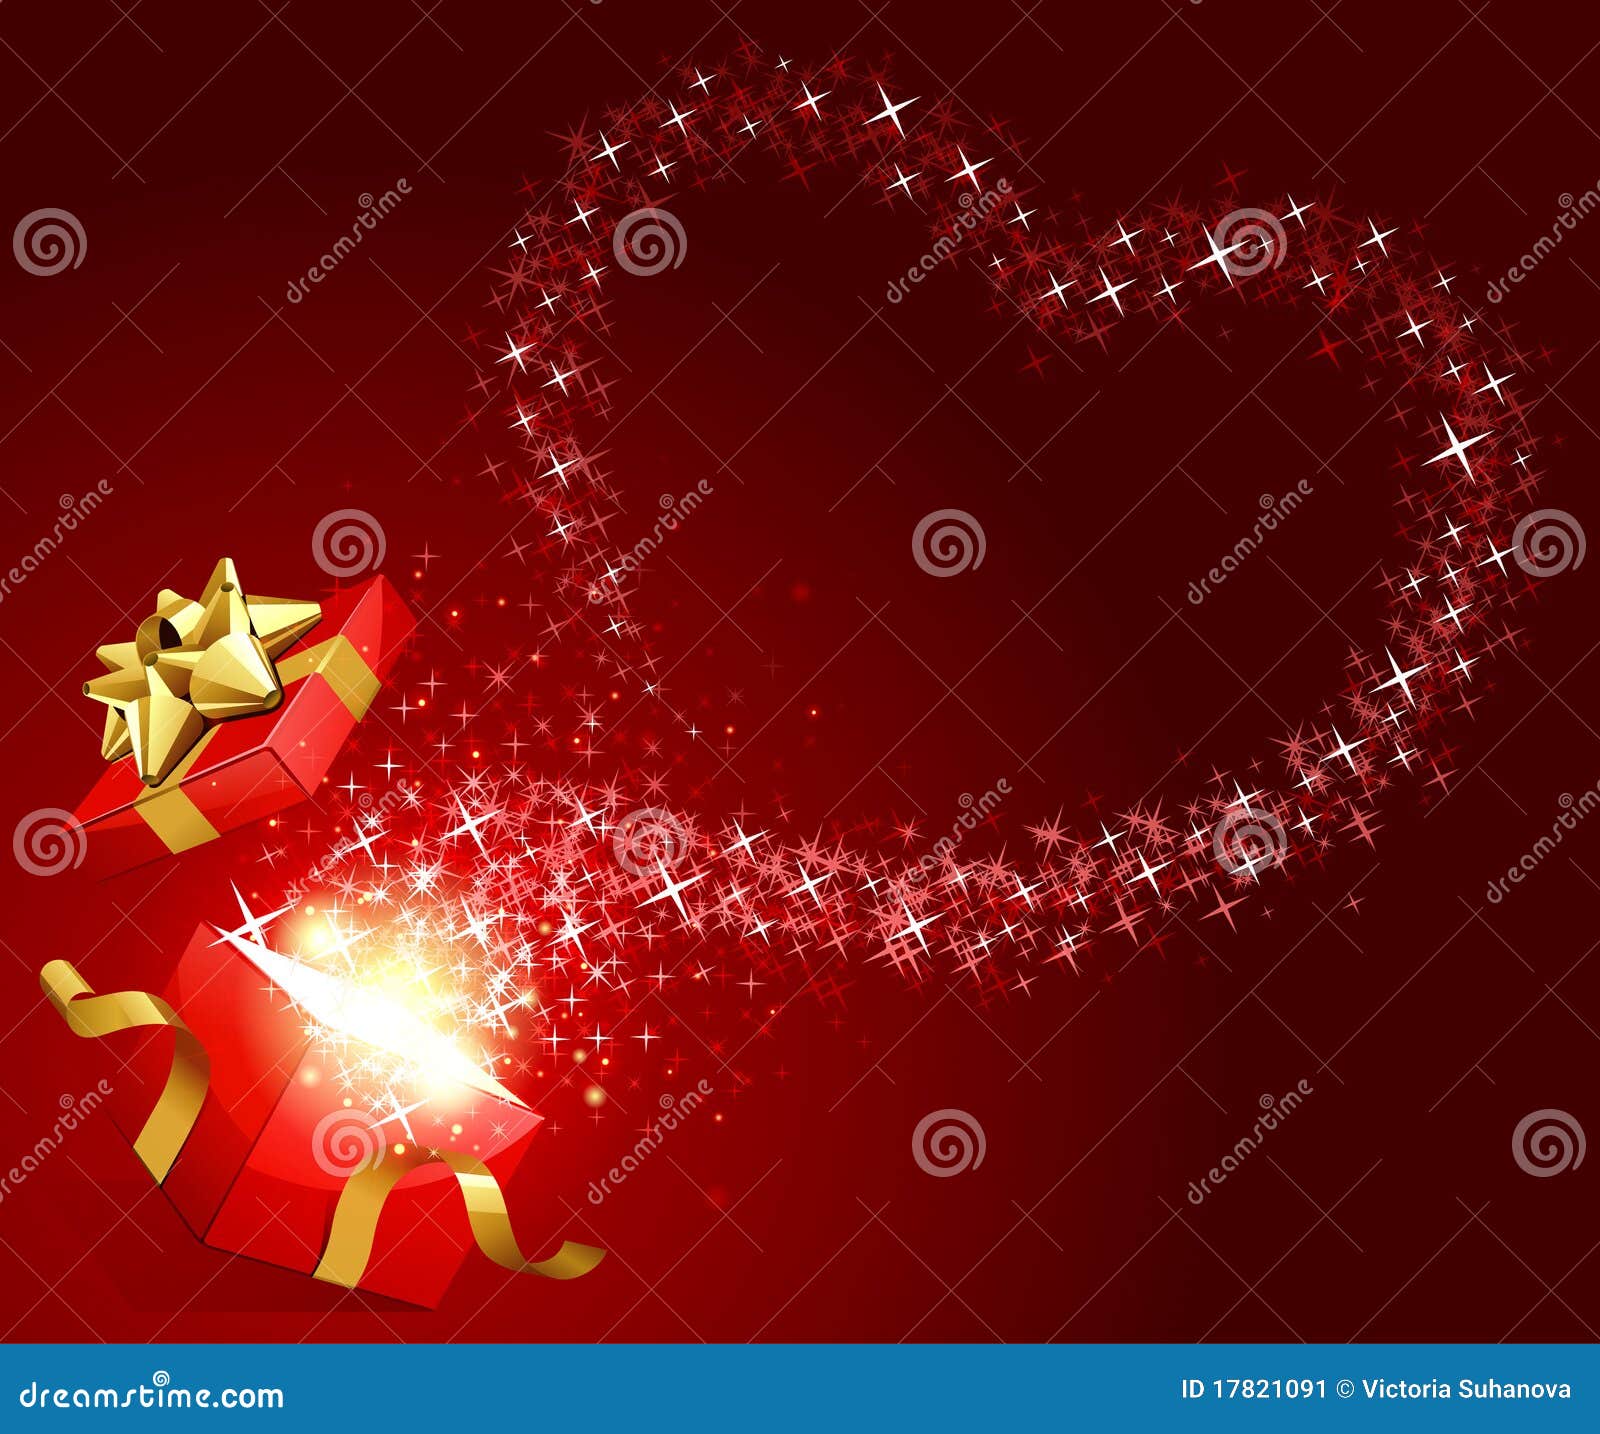 Open gift with fly stars heart shape Valentine s day background